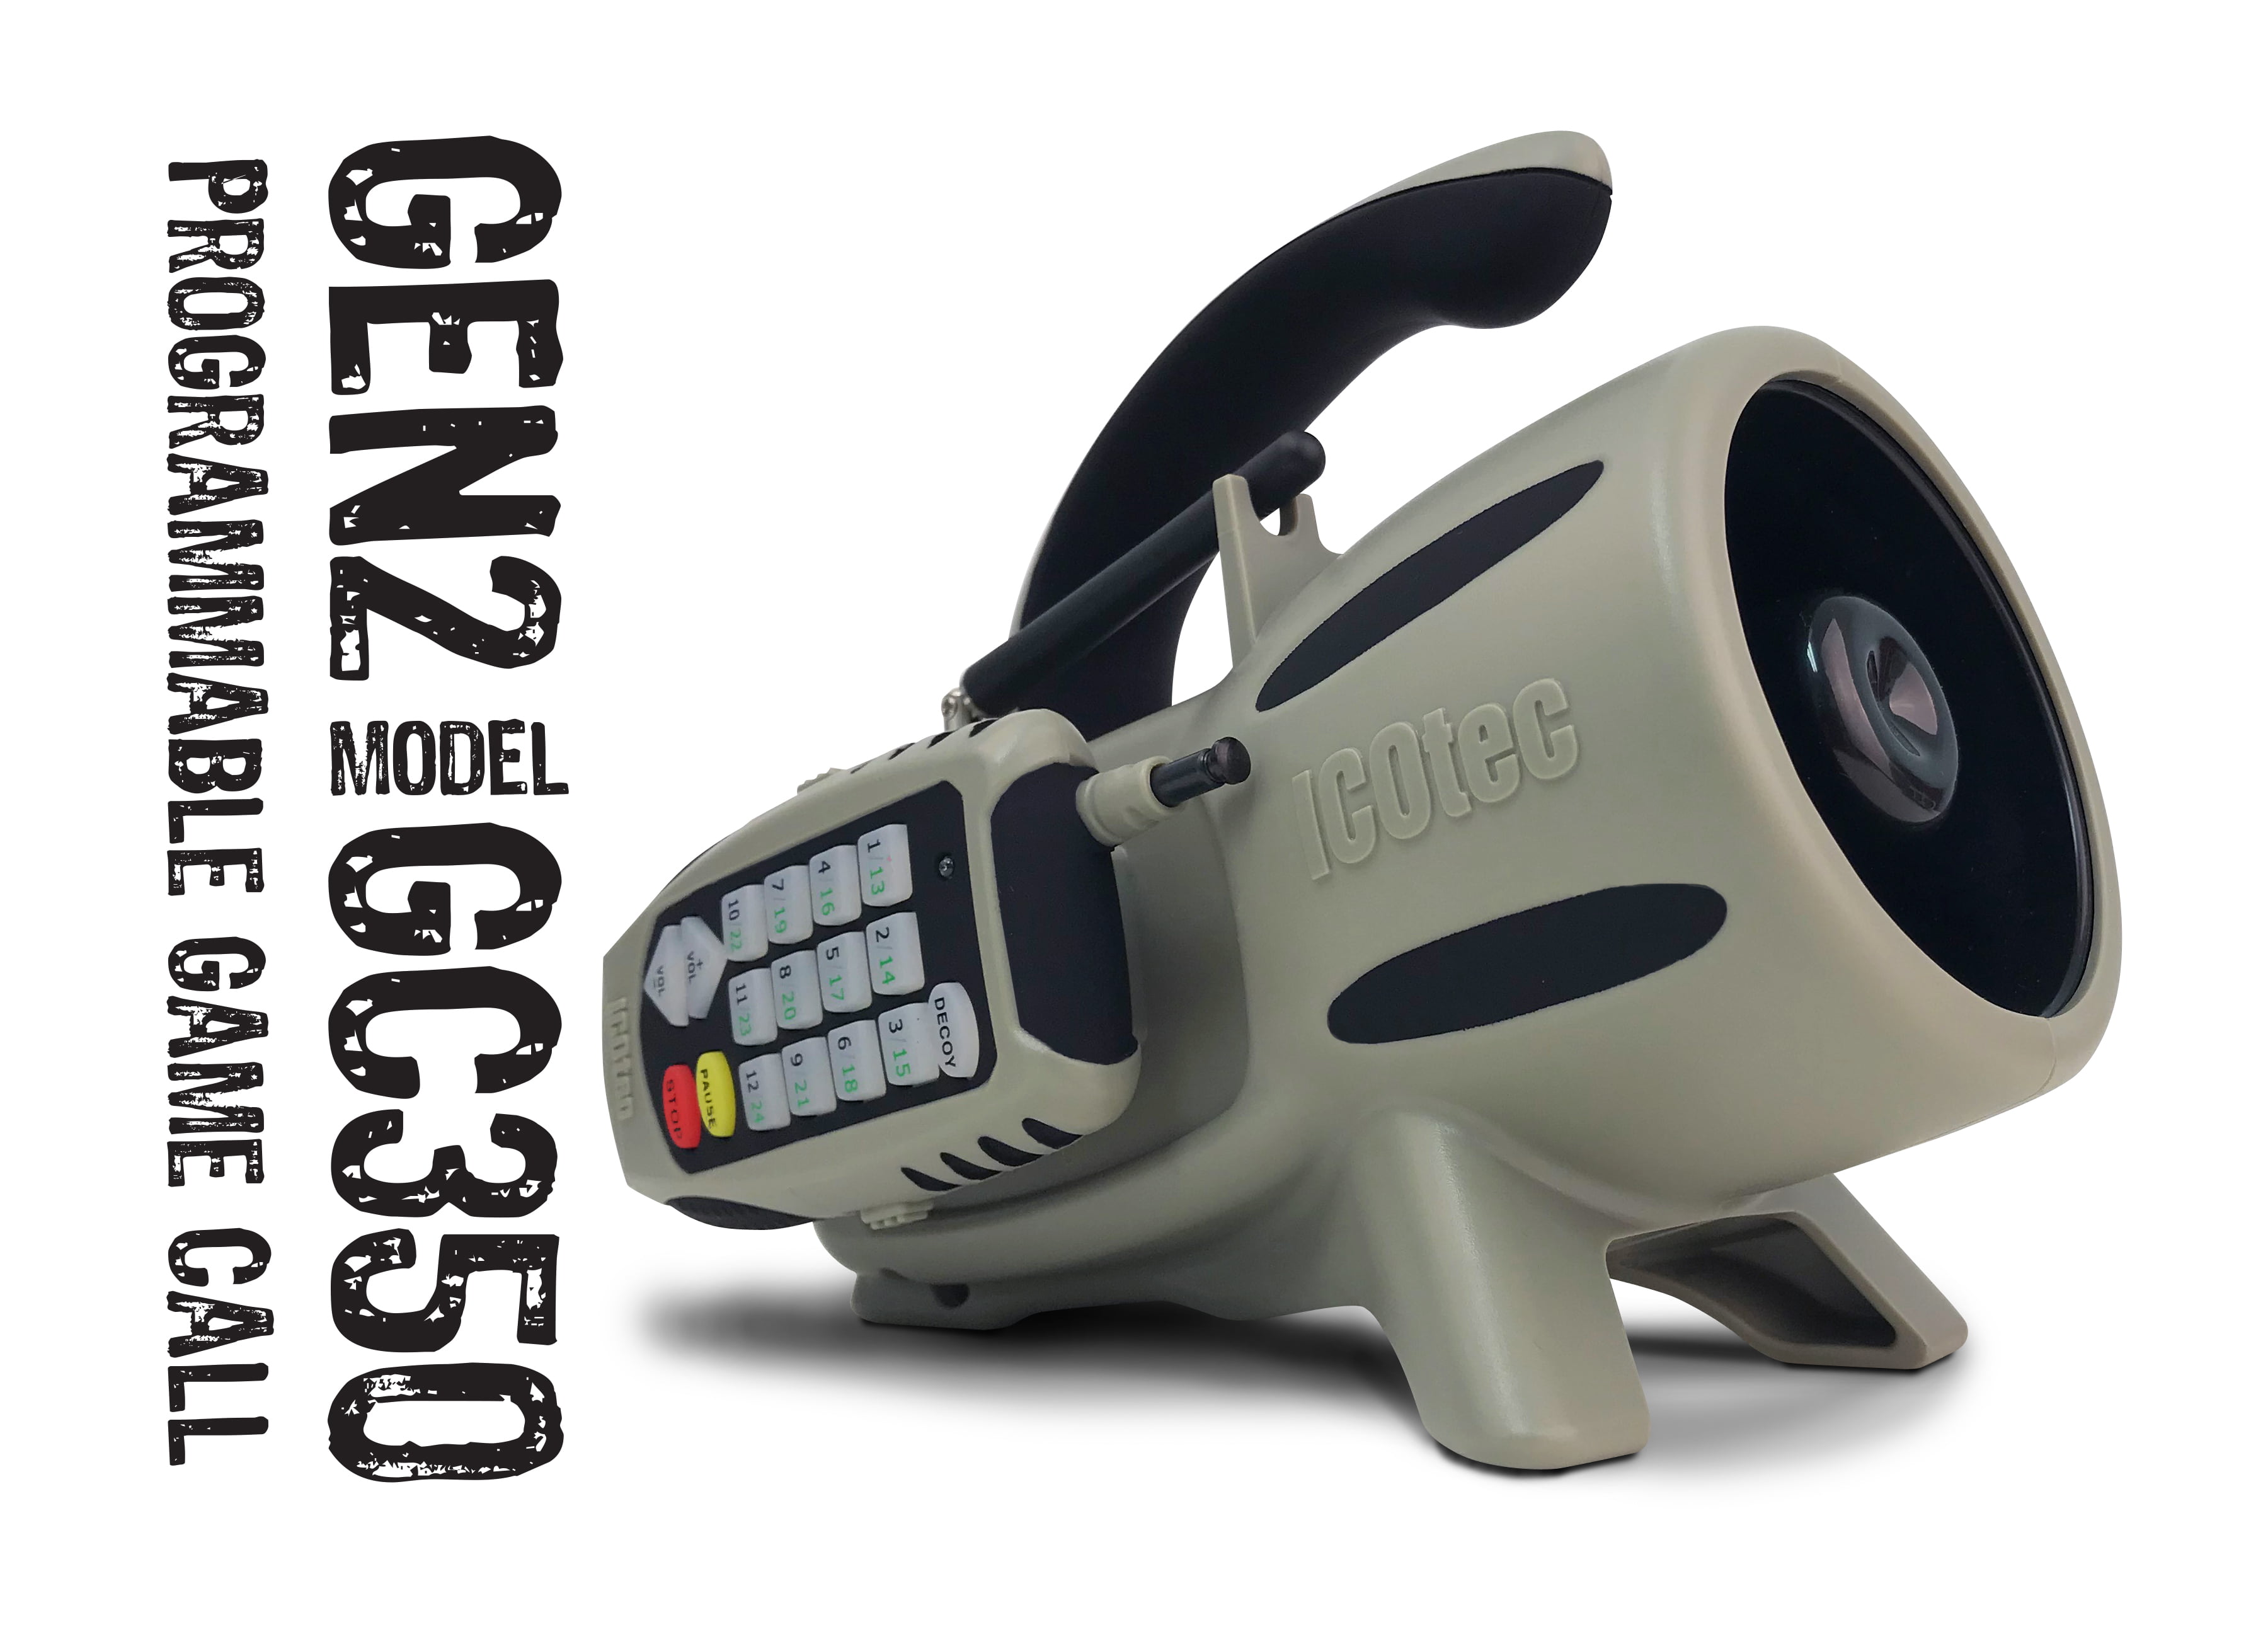 ICOtec GEN2 GC350 Programmable Game Call - 24 Sounds